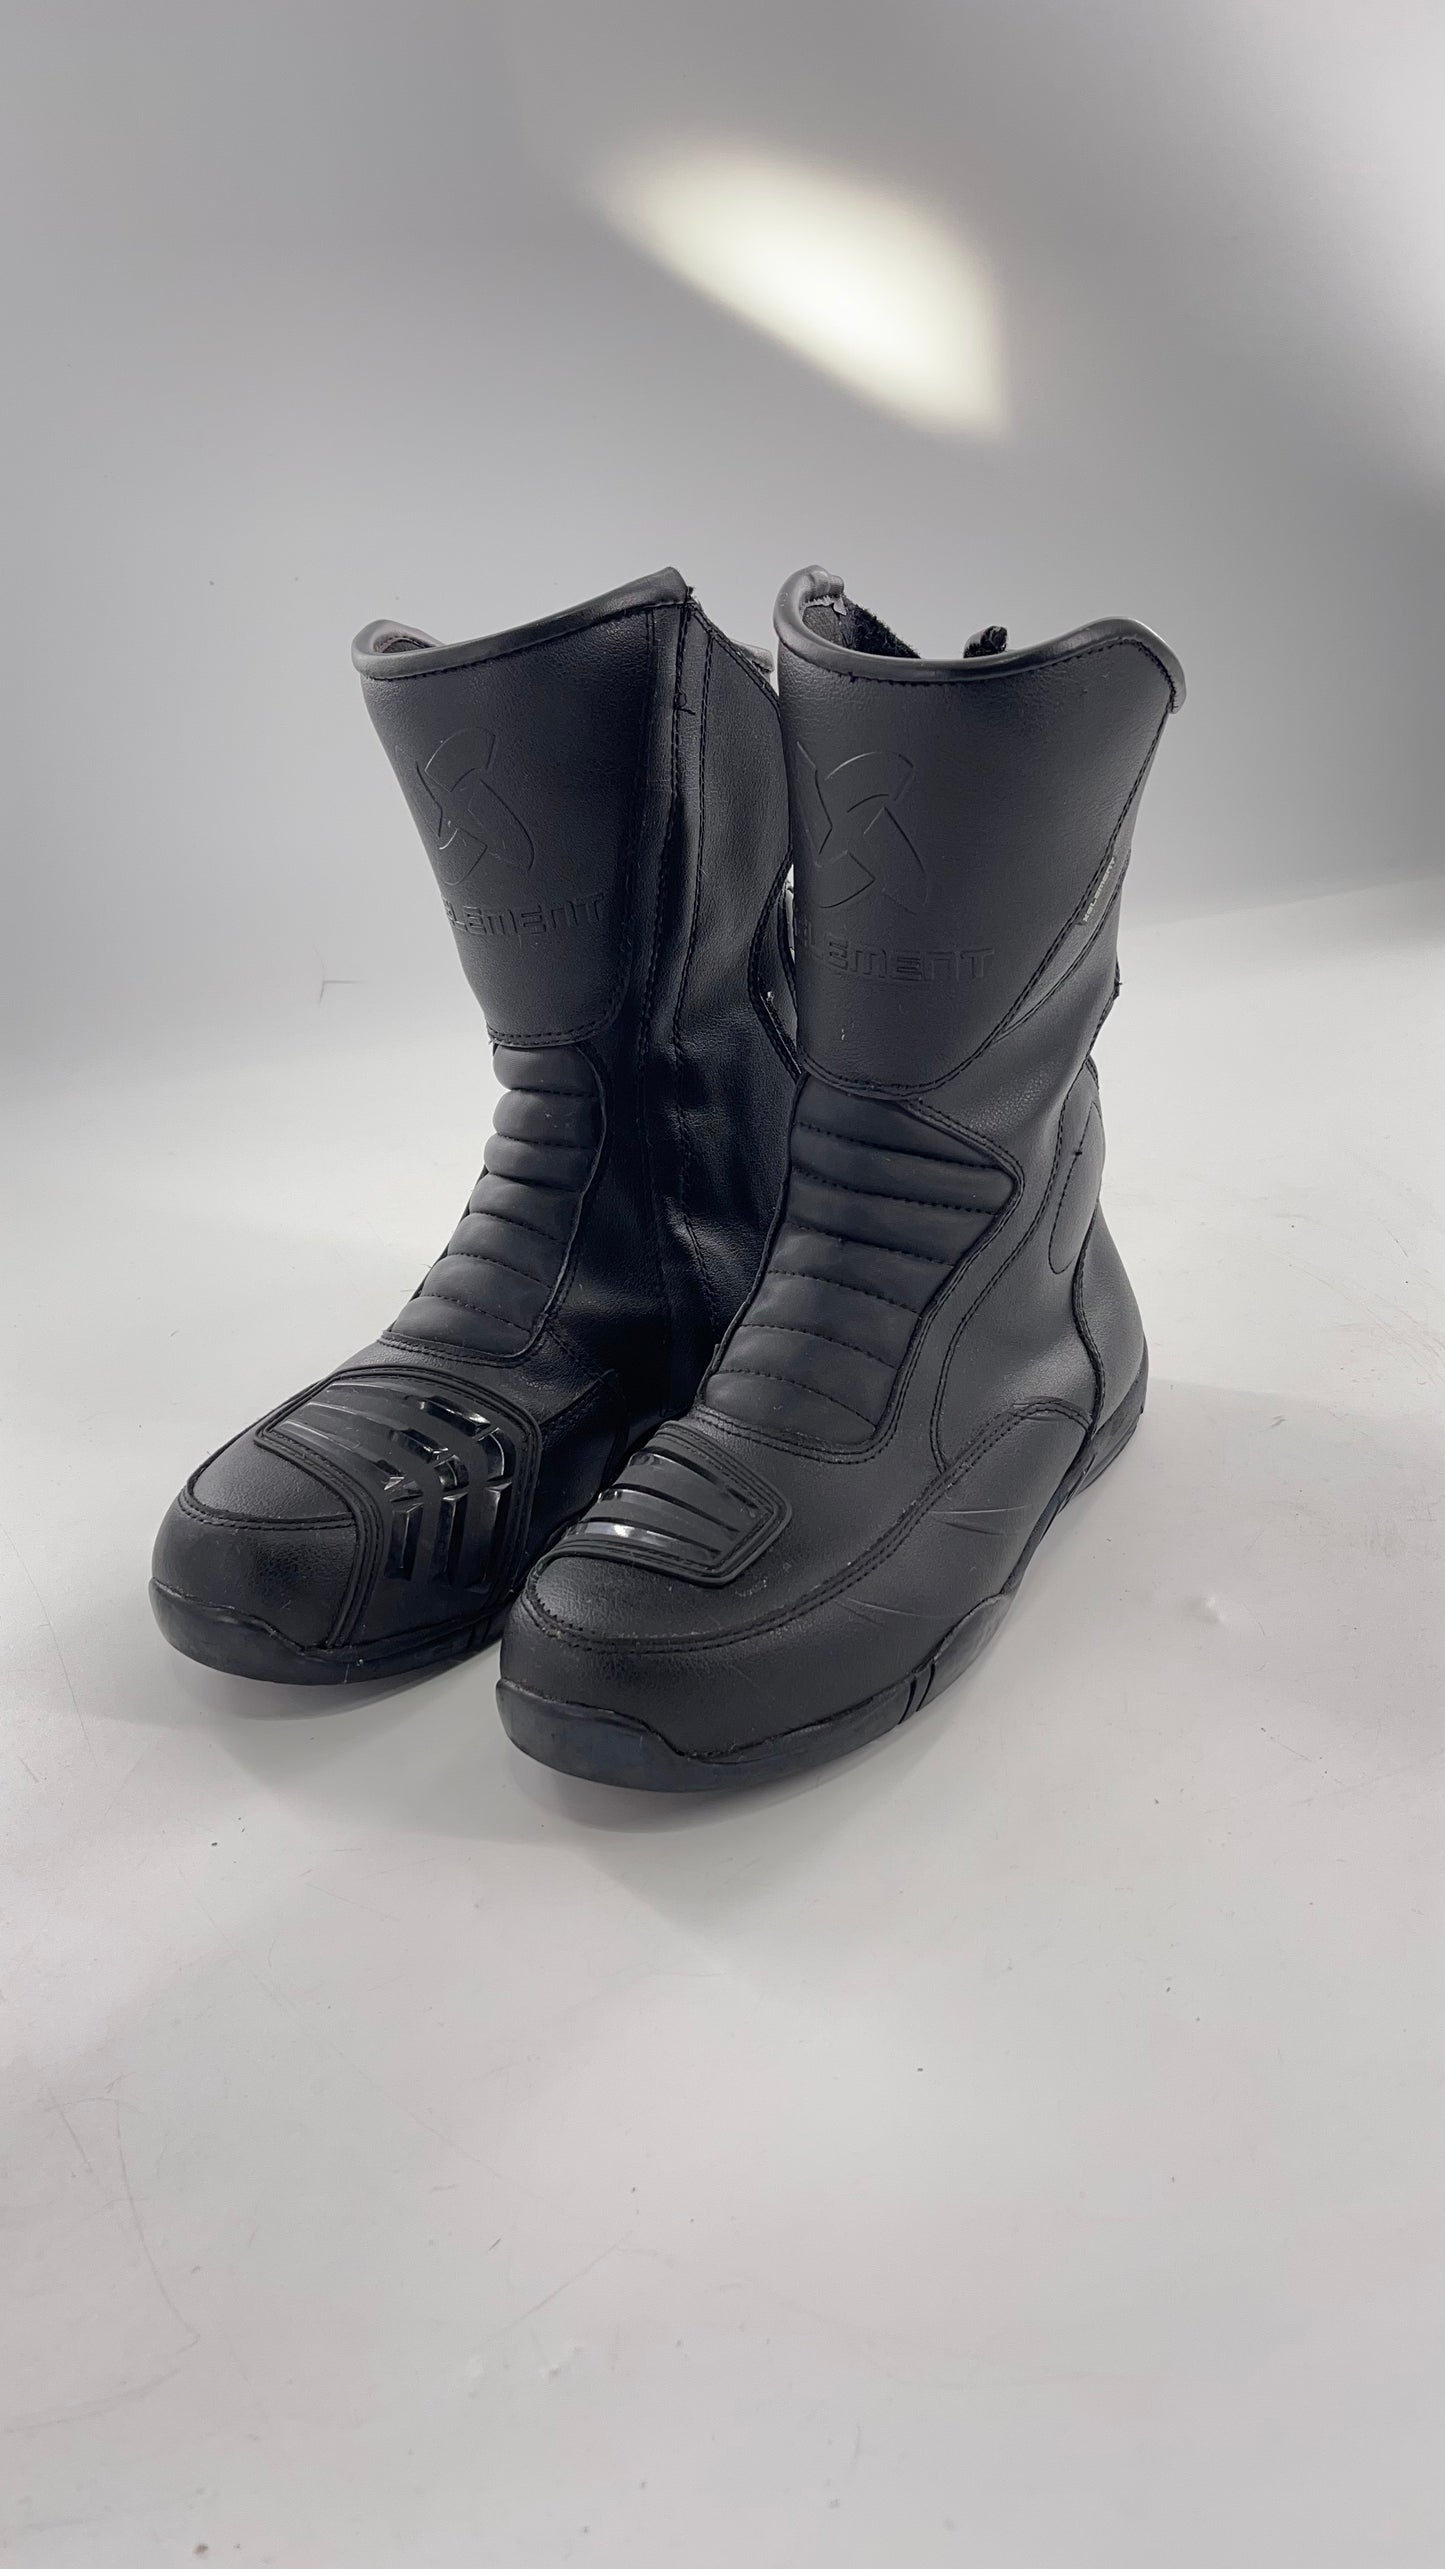 XELEMENT Black Leather Motorcycle Motocross Riding Boots (9.5)